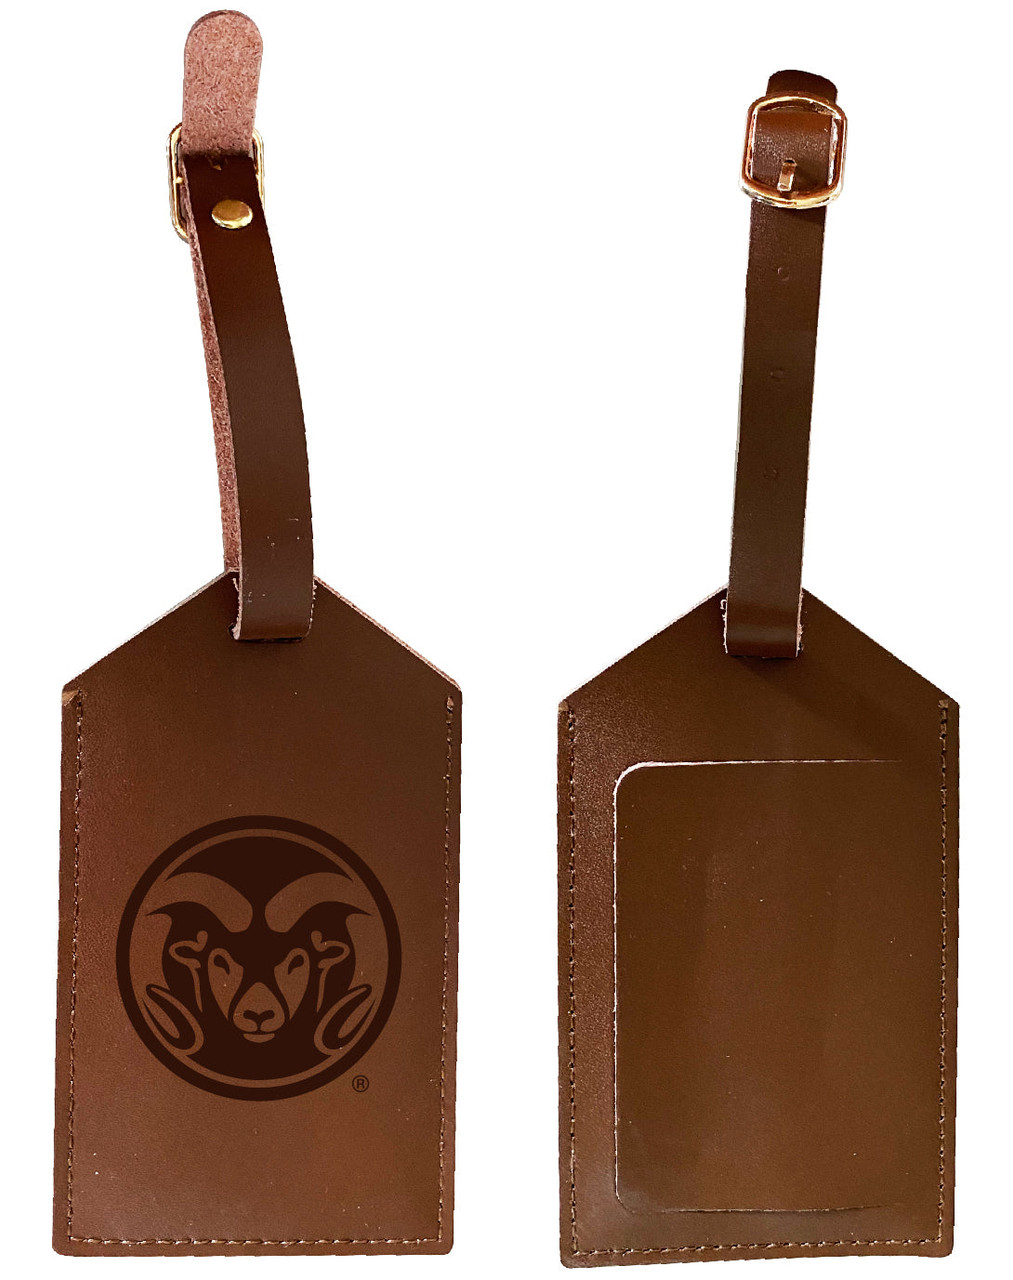 Colorado State Rams Leather Luggage Tag Engraved